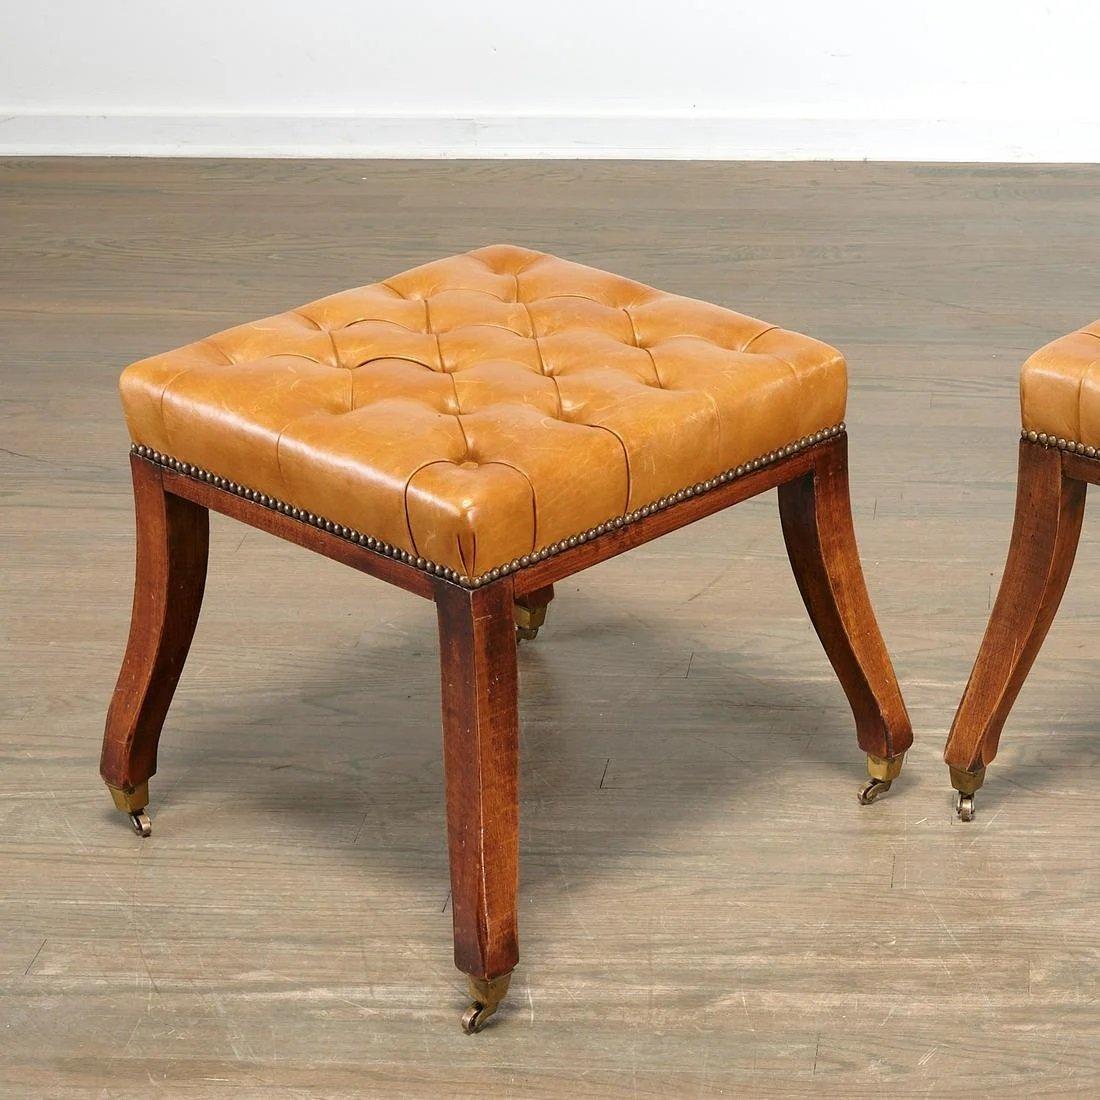 Good pair of Regency style Tobacco saddle leather button tufted stools on splayed mahogany legs ending in brass cups and casters.